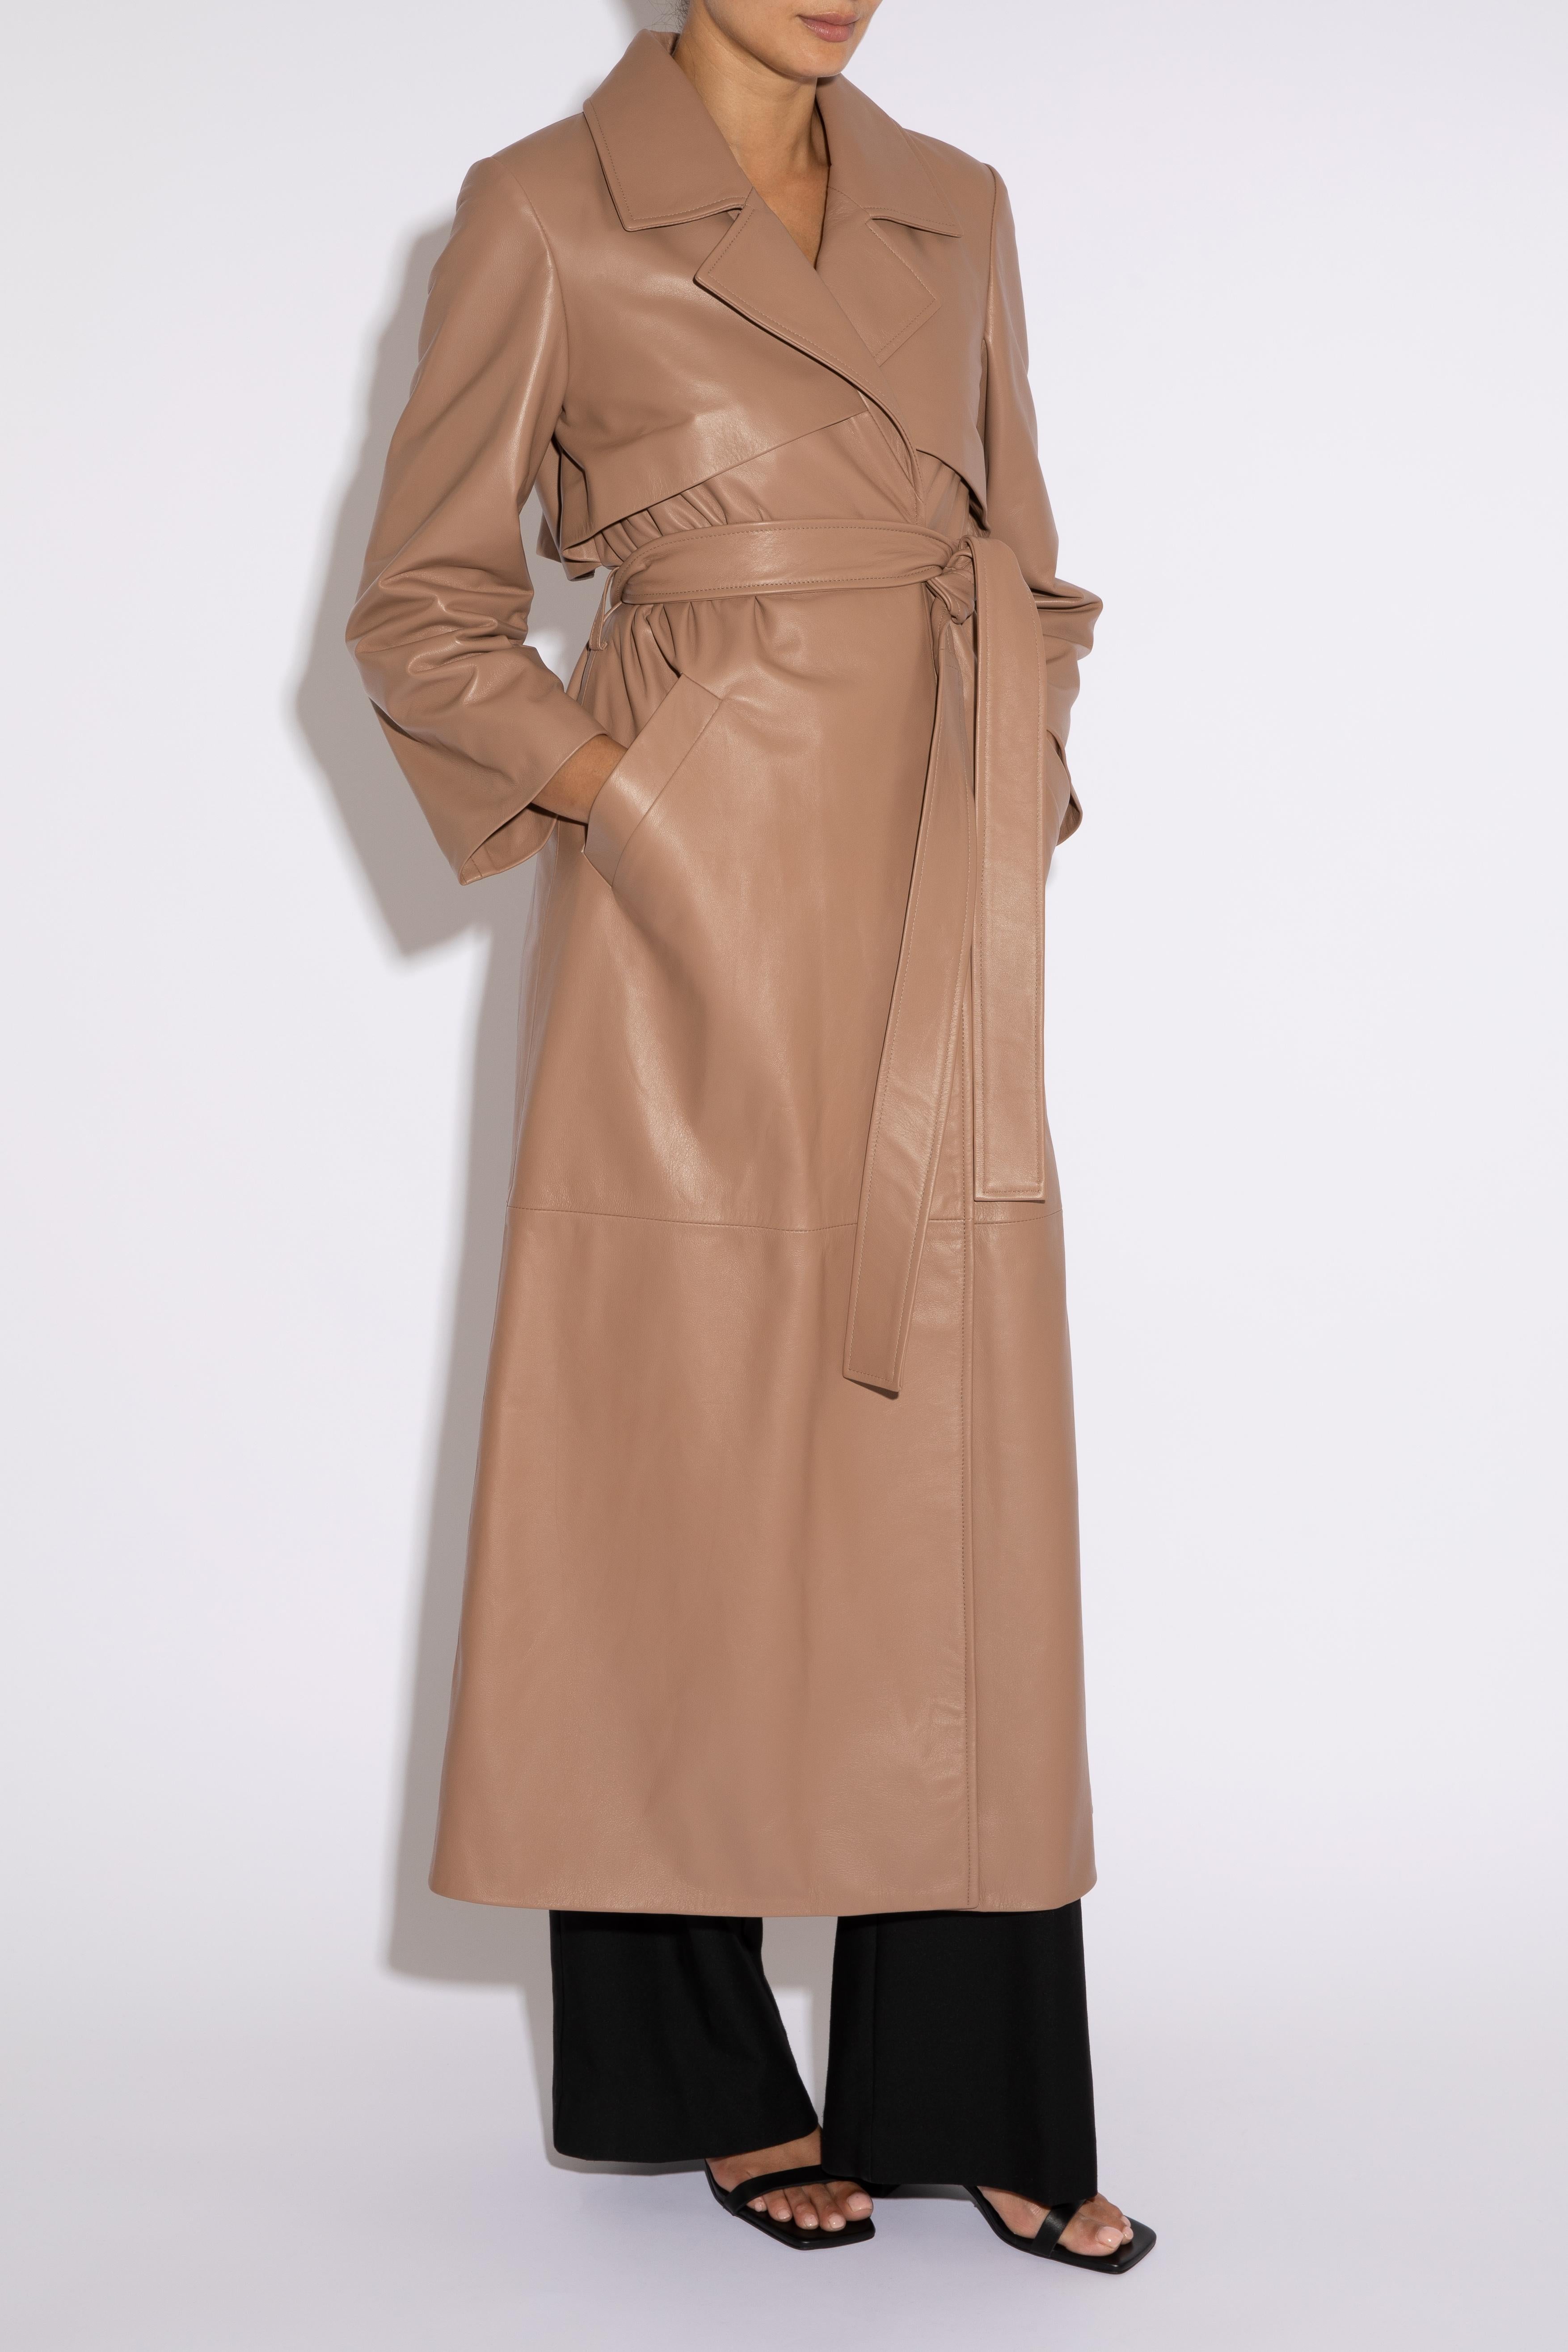 Verheyen London Leather Trench Coat in Taupe Brown - Size uk 10 For Sale 1